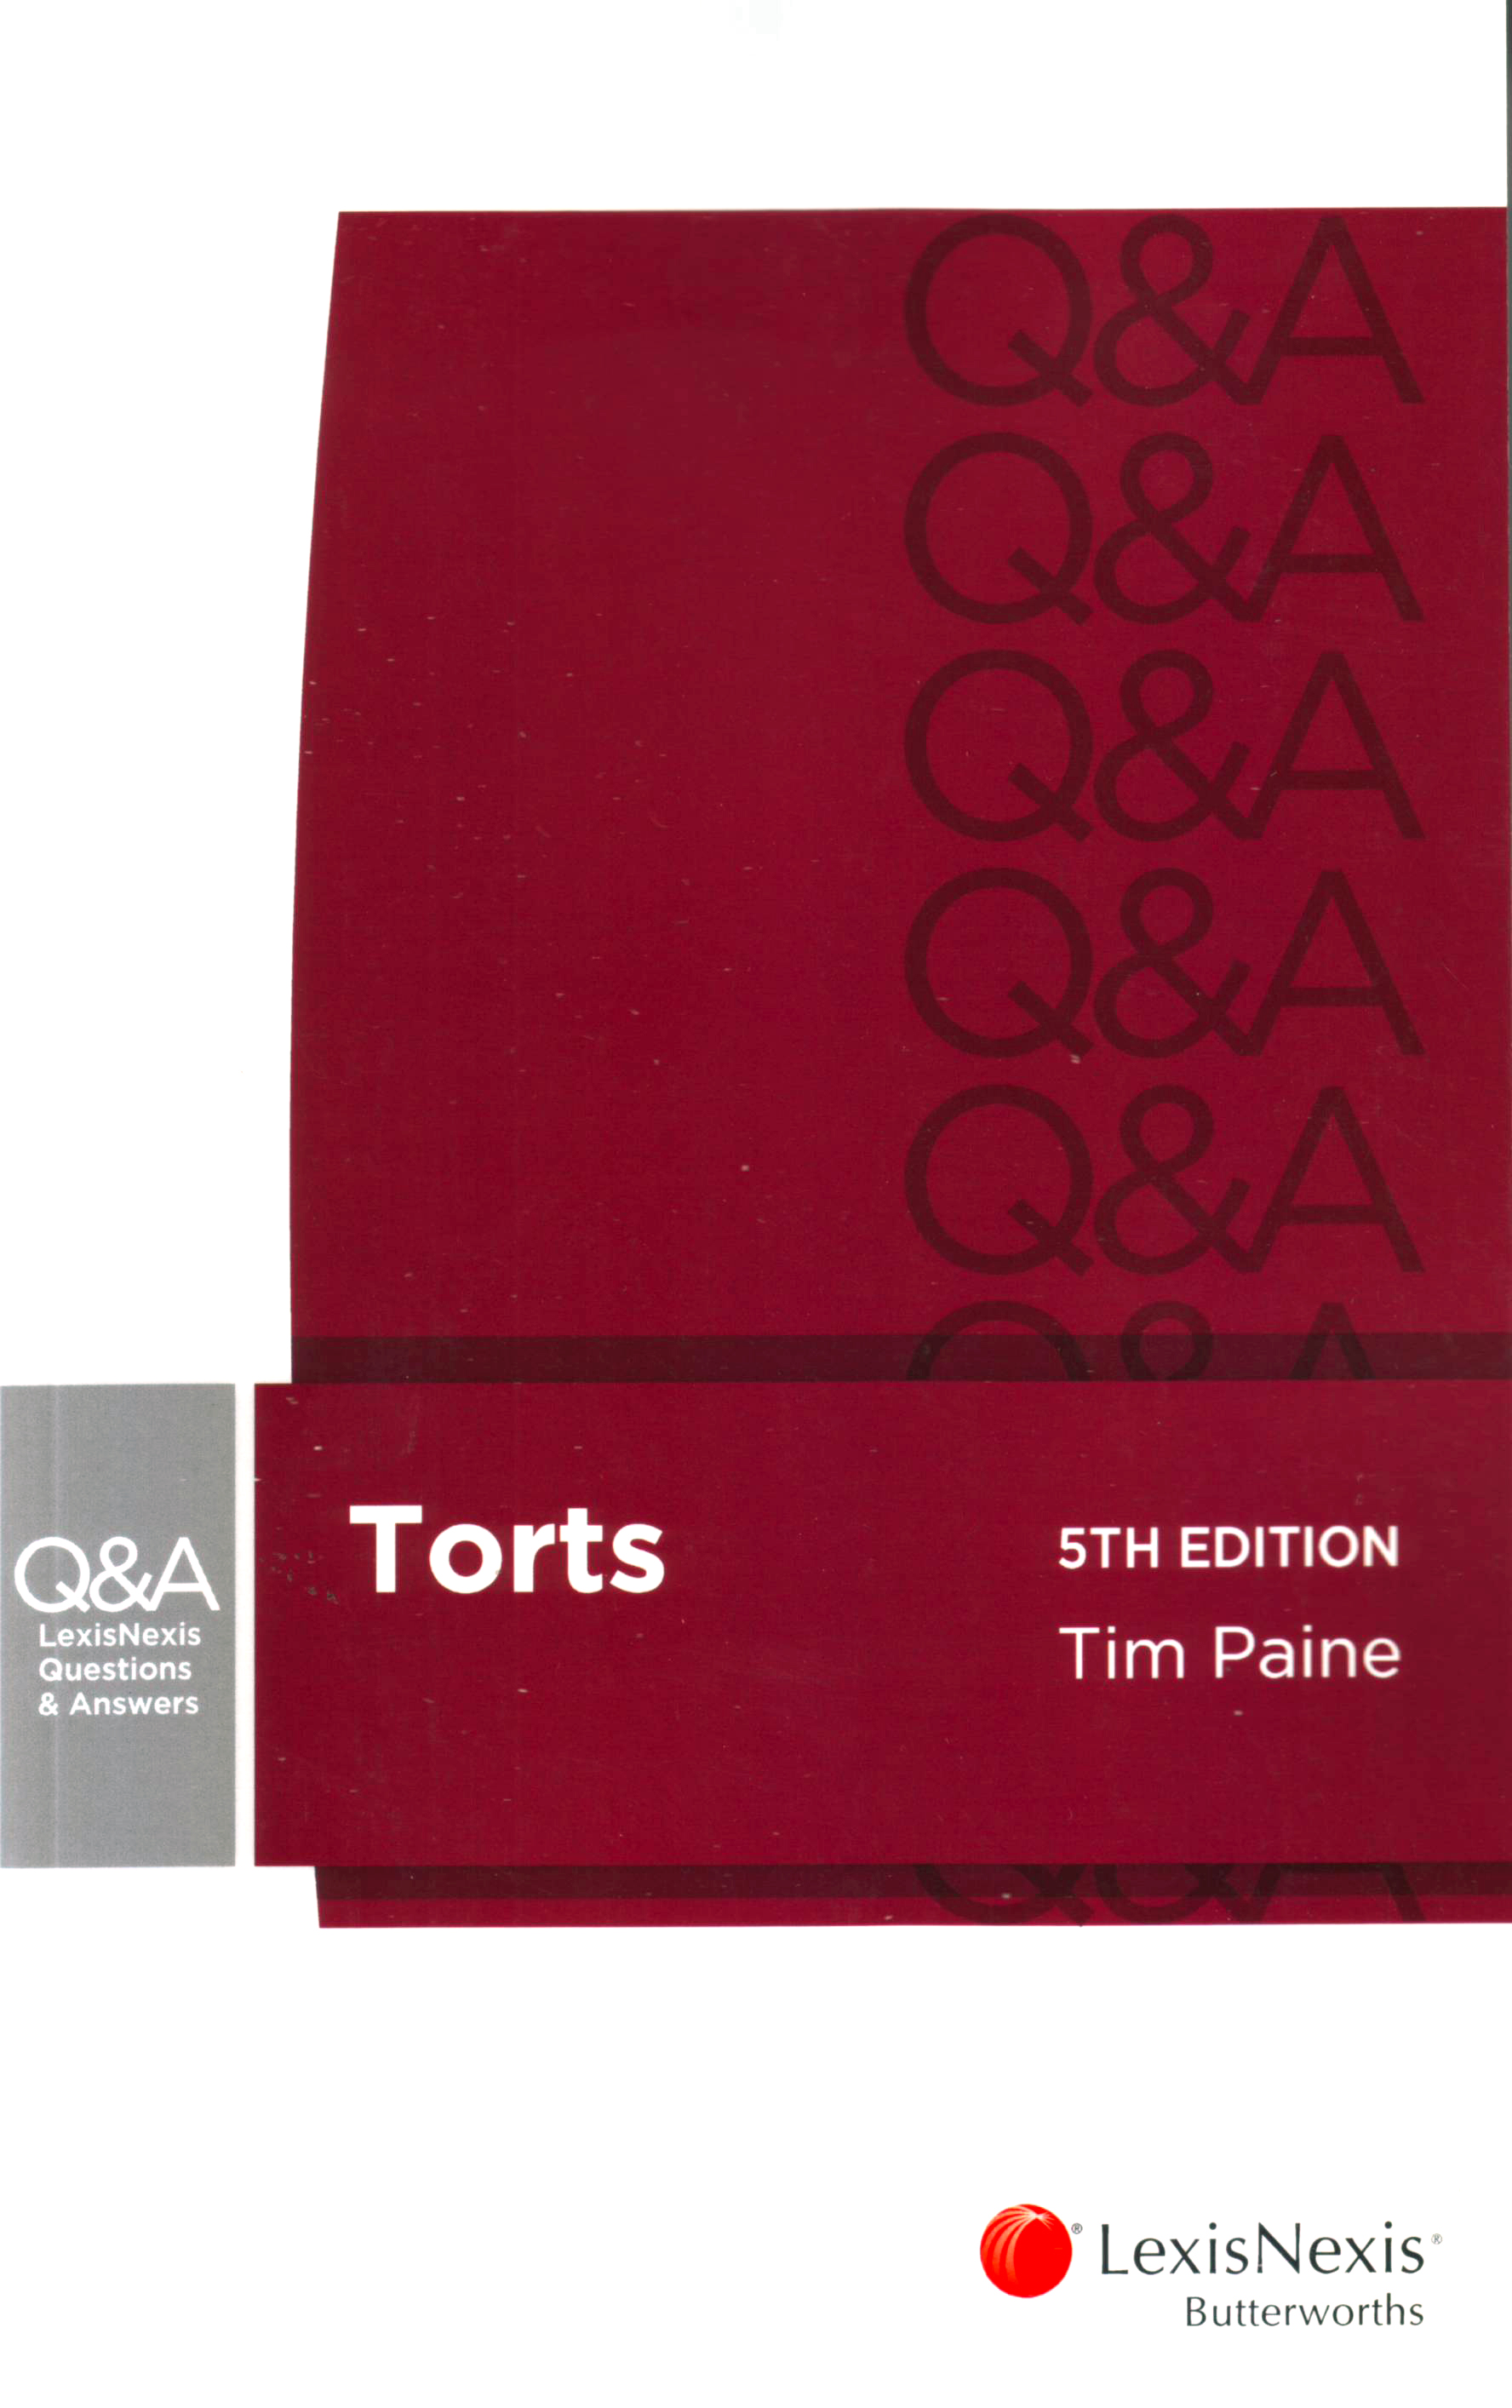 LexisNexis Questions and Answers: Torts e5